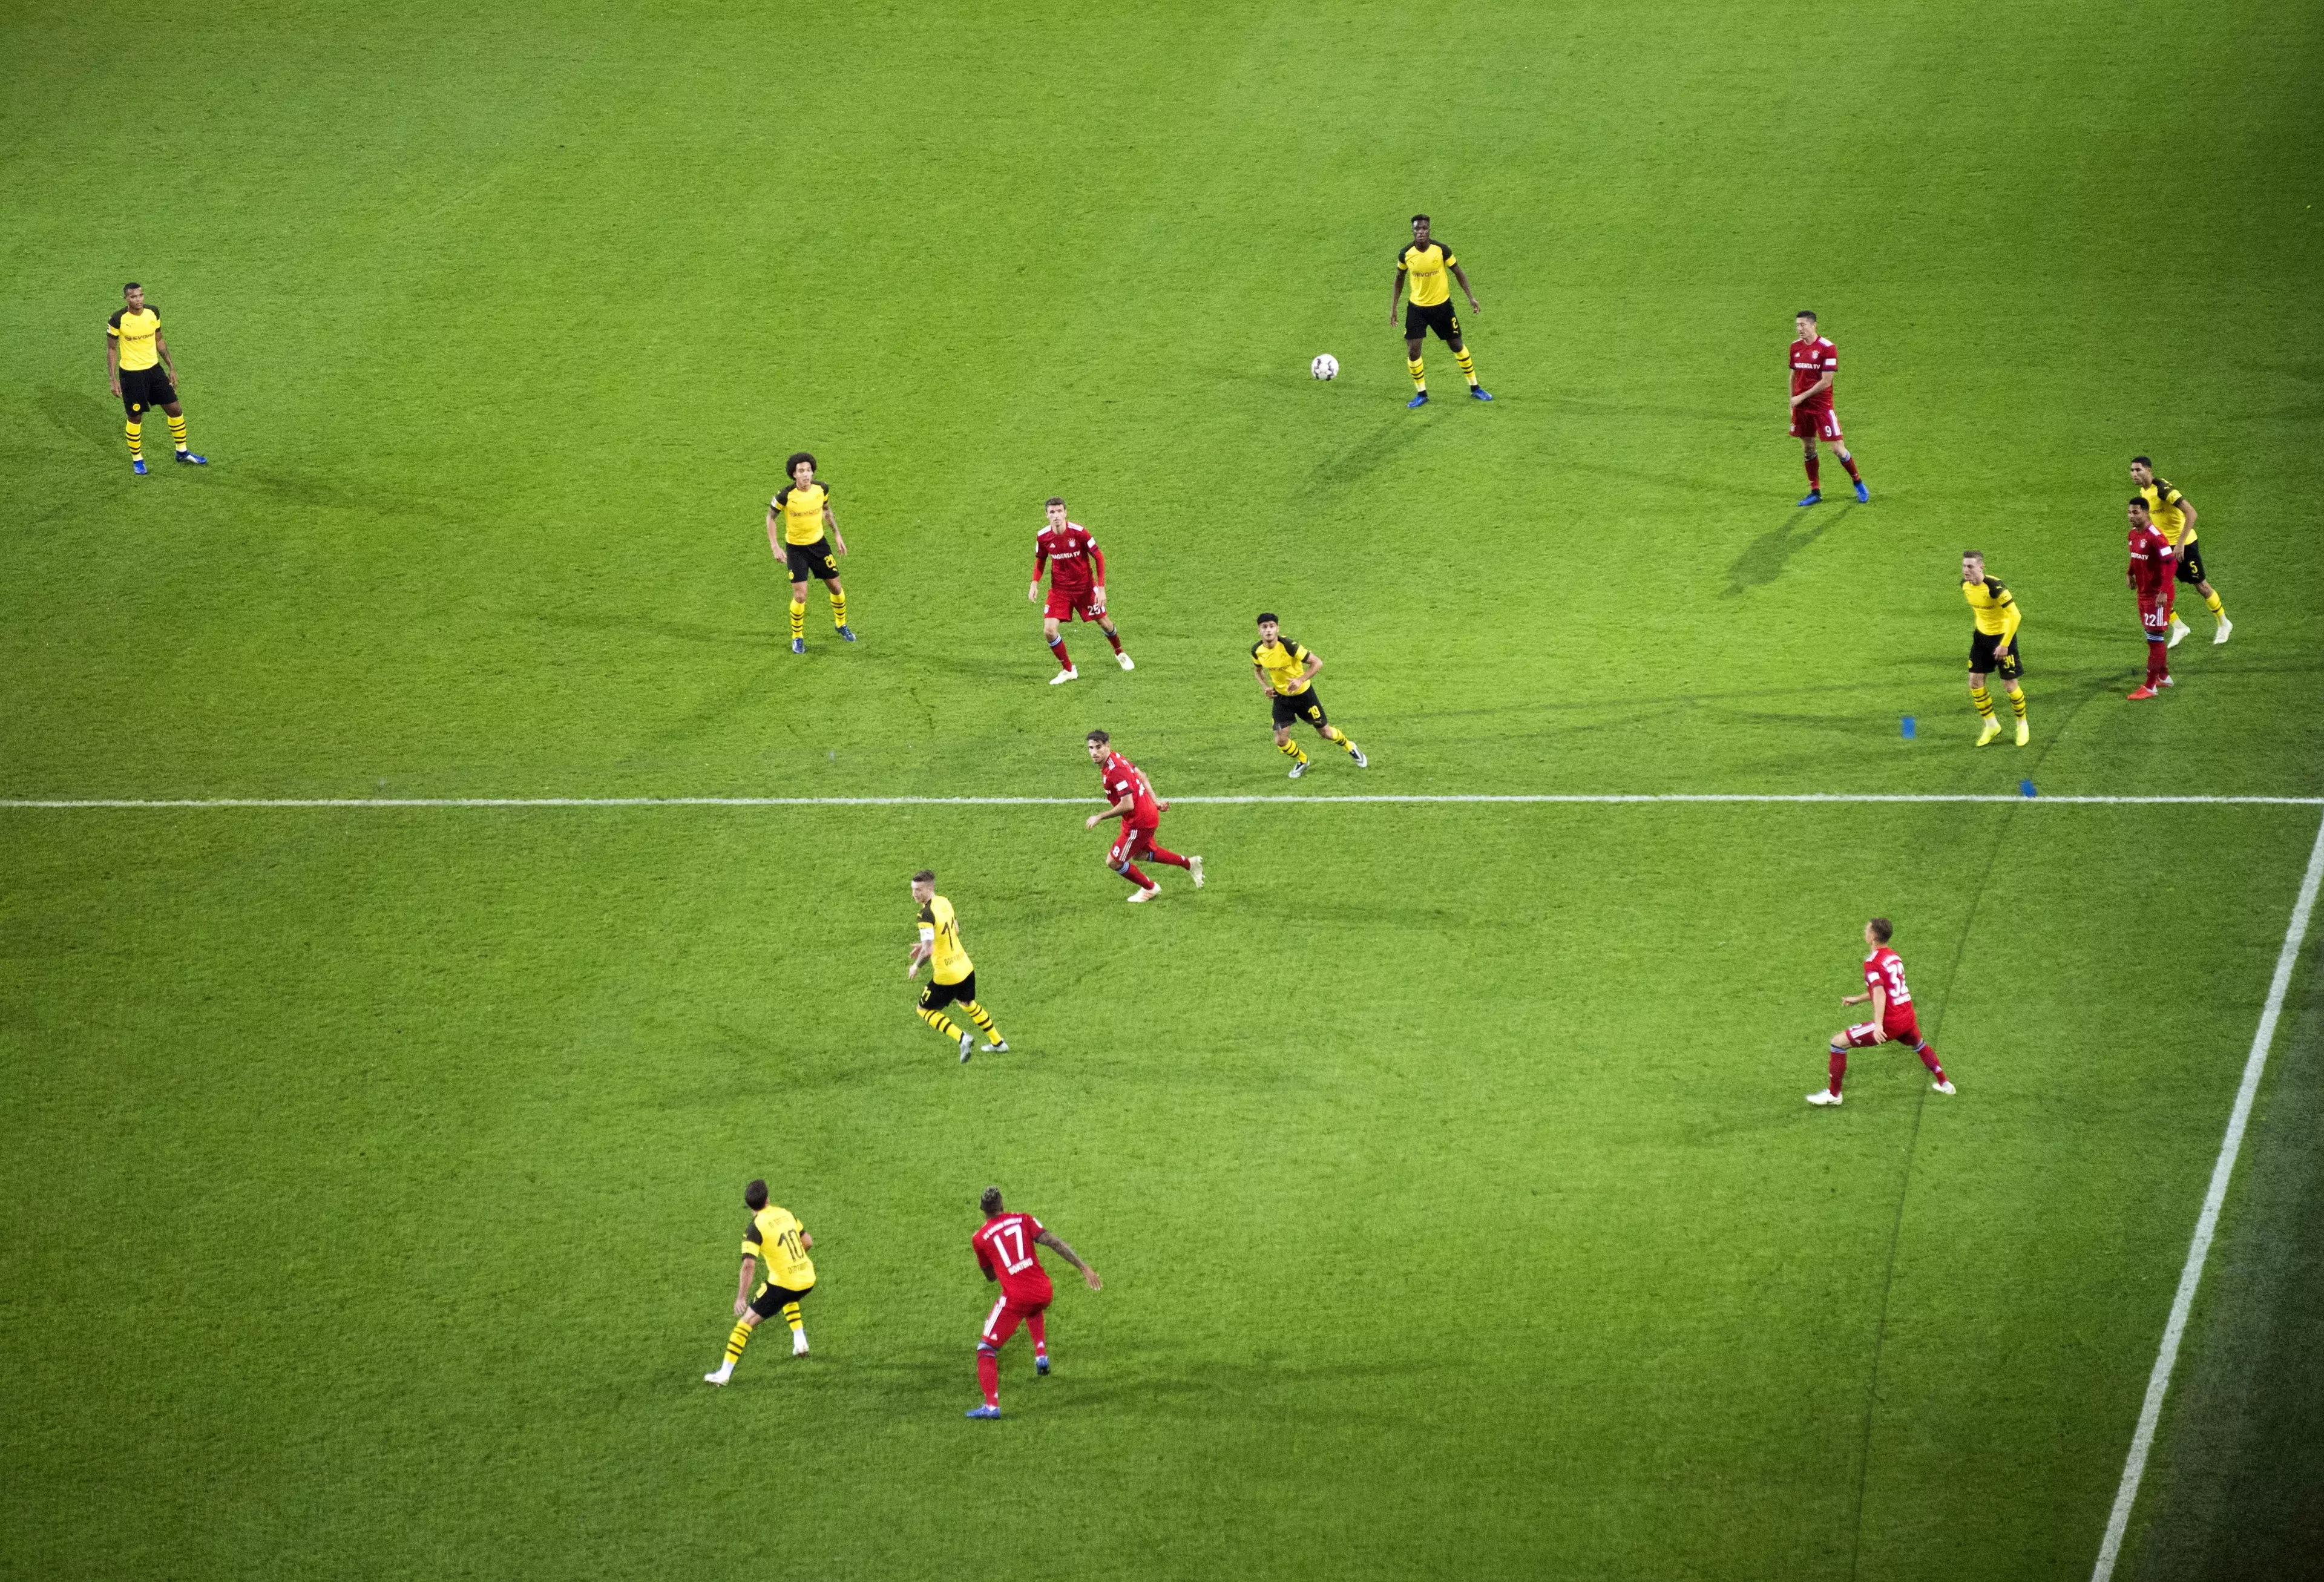 Bayern and Dortmund renew rivalries in a huge game at the weekend. Image: PA Images